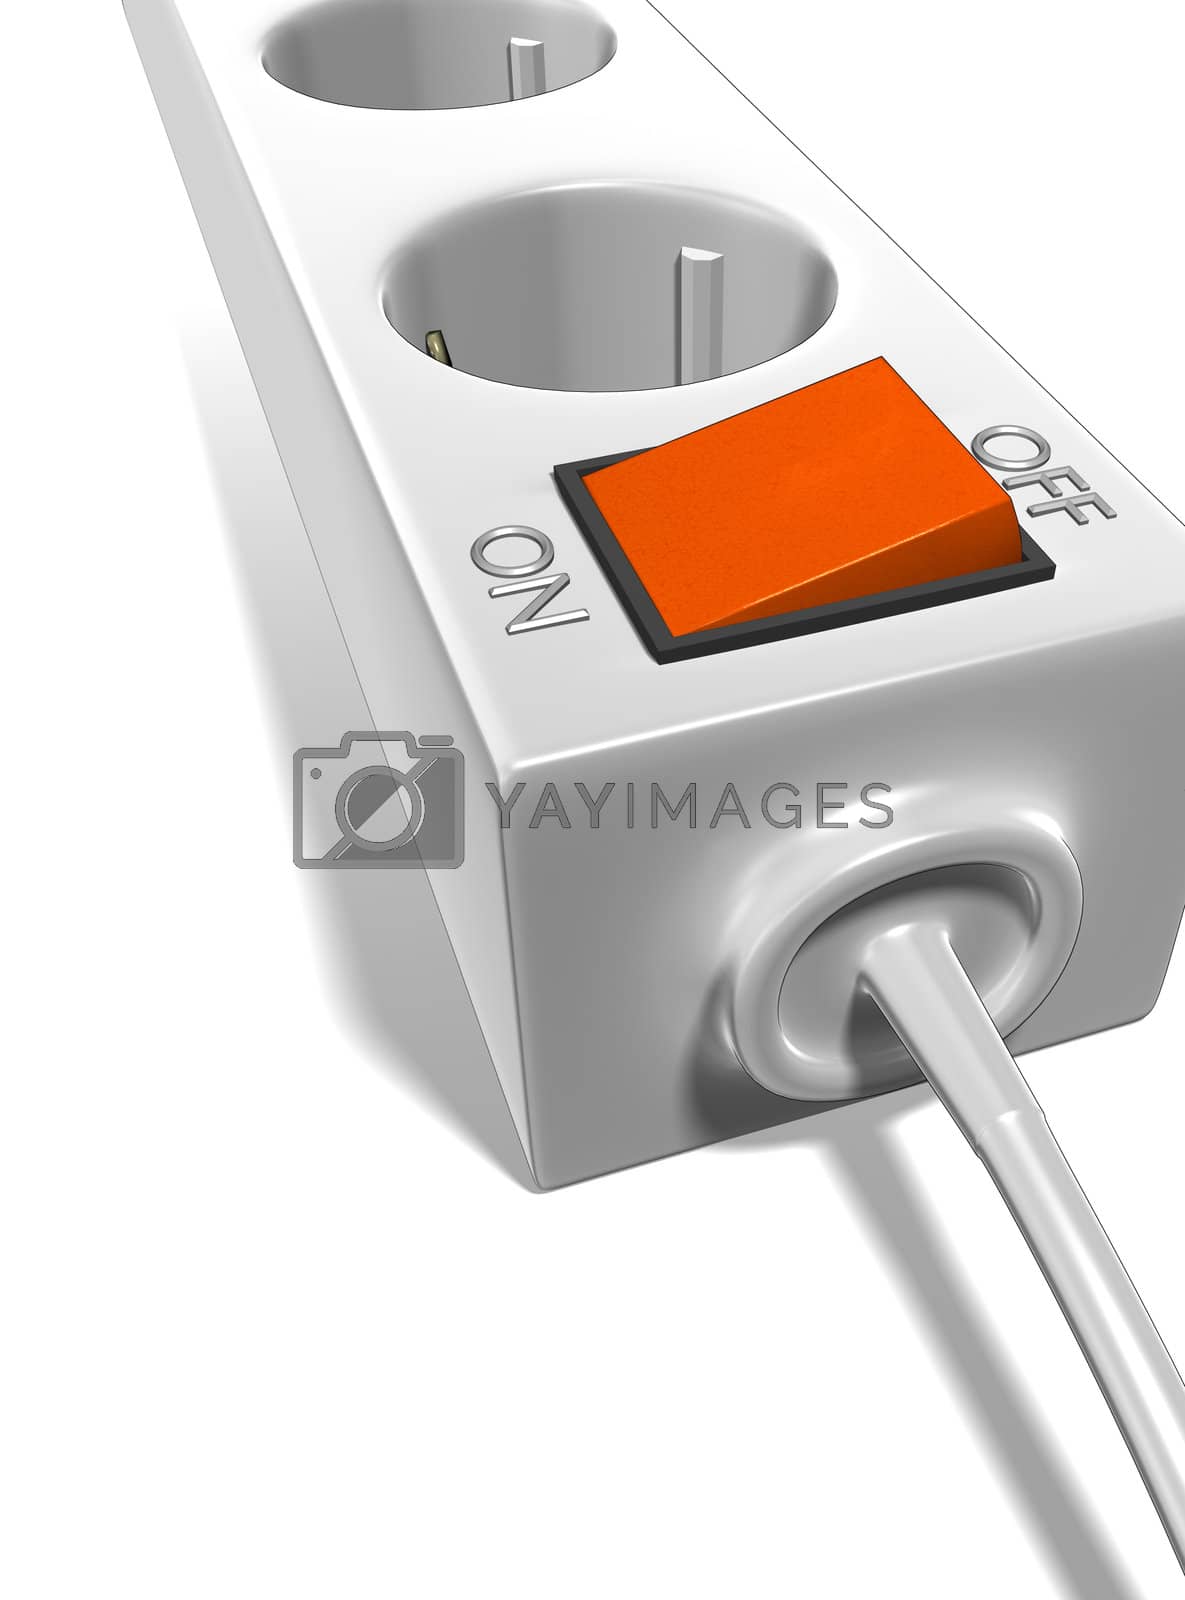 Royalty free image of power strip by magann